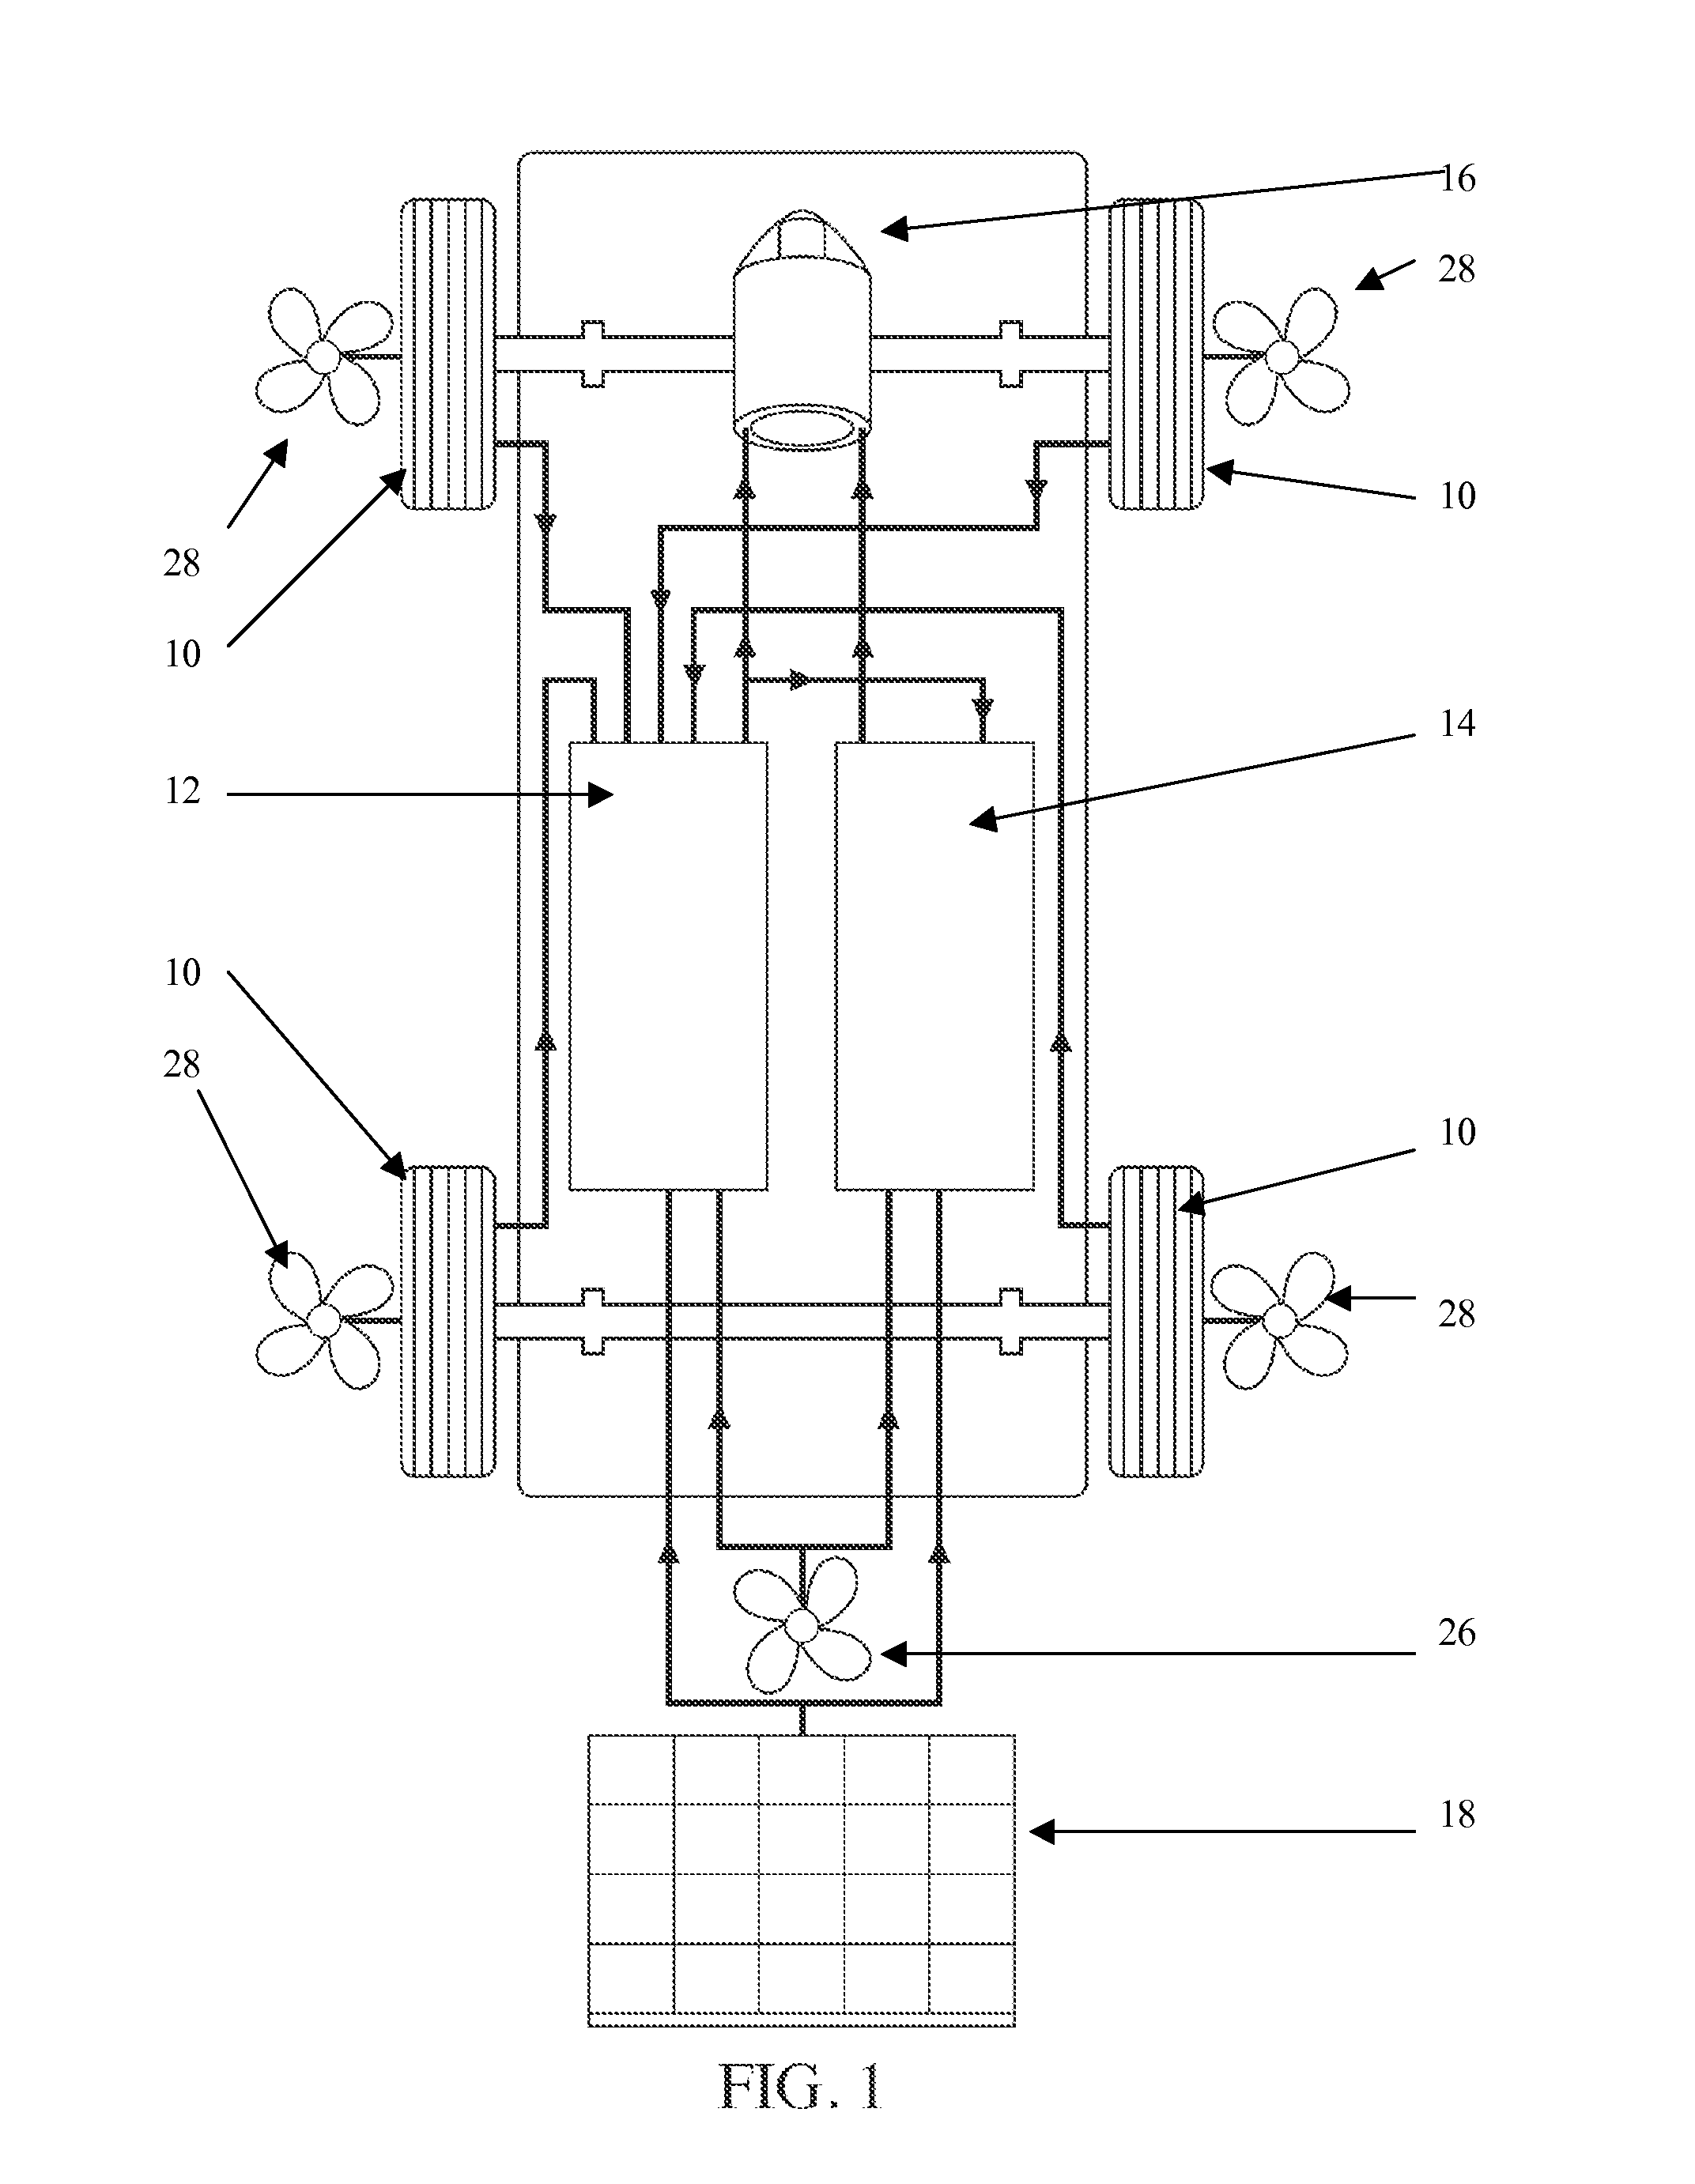 Self rechargeable synergy drive for a motor vehicle